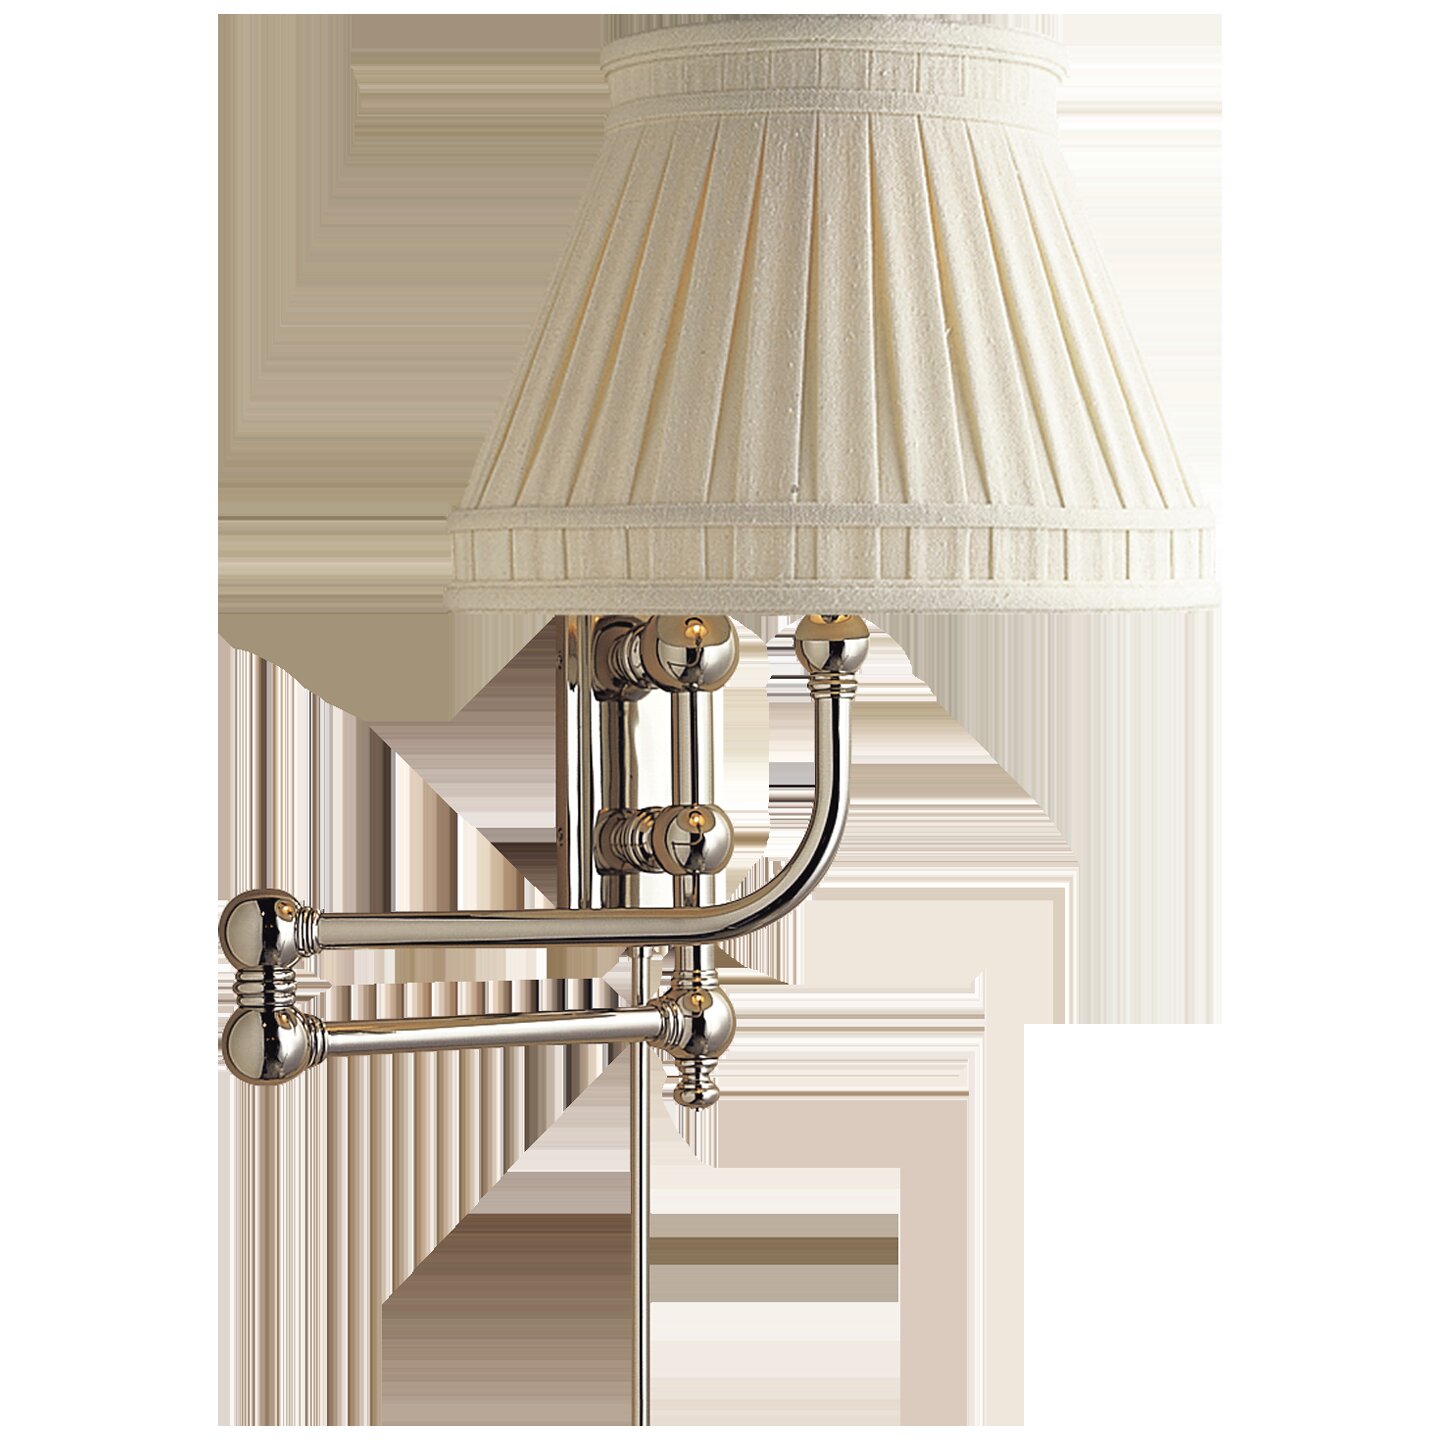 Visual Comfort Pimlico Table Lamp by Chapman & Myers Adjustable